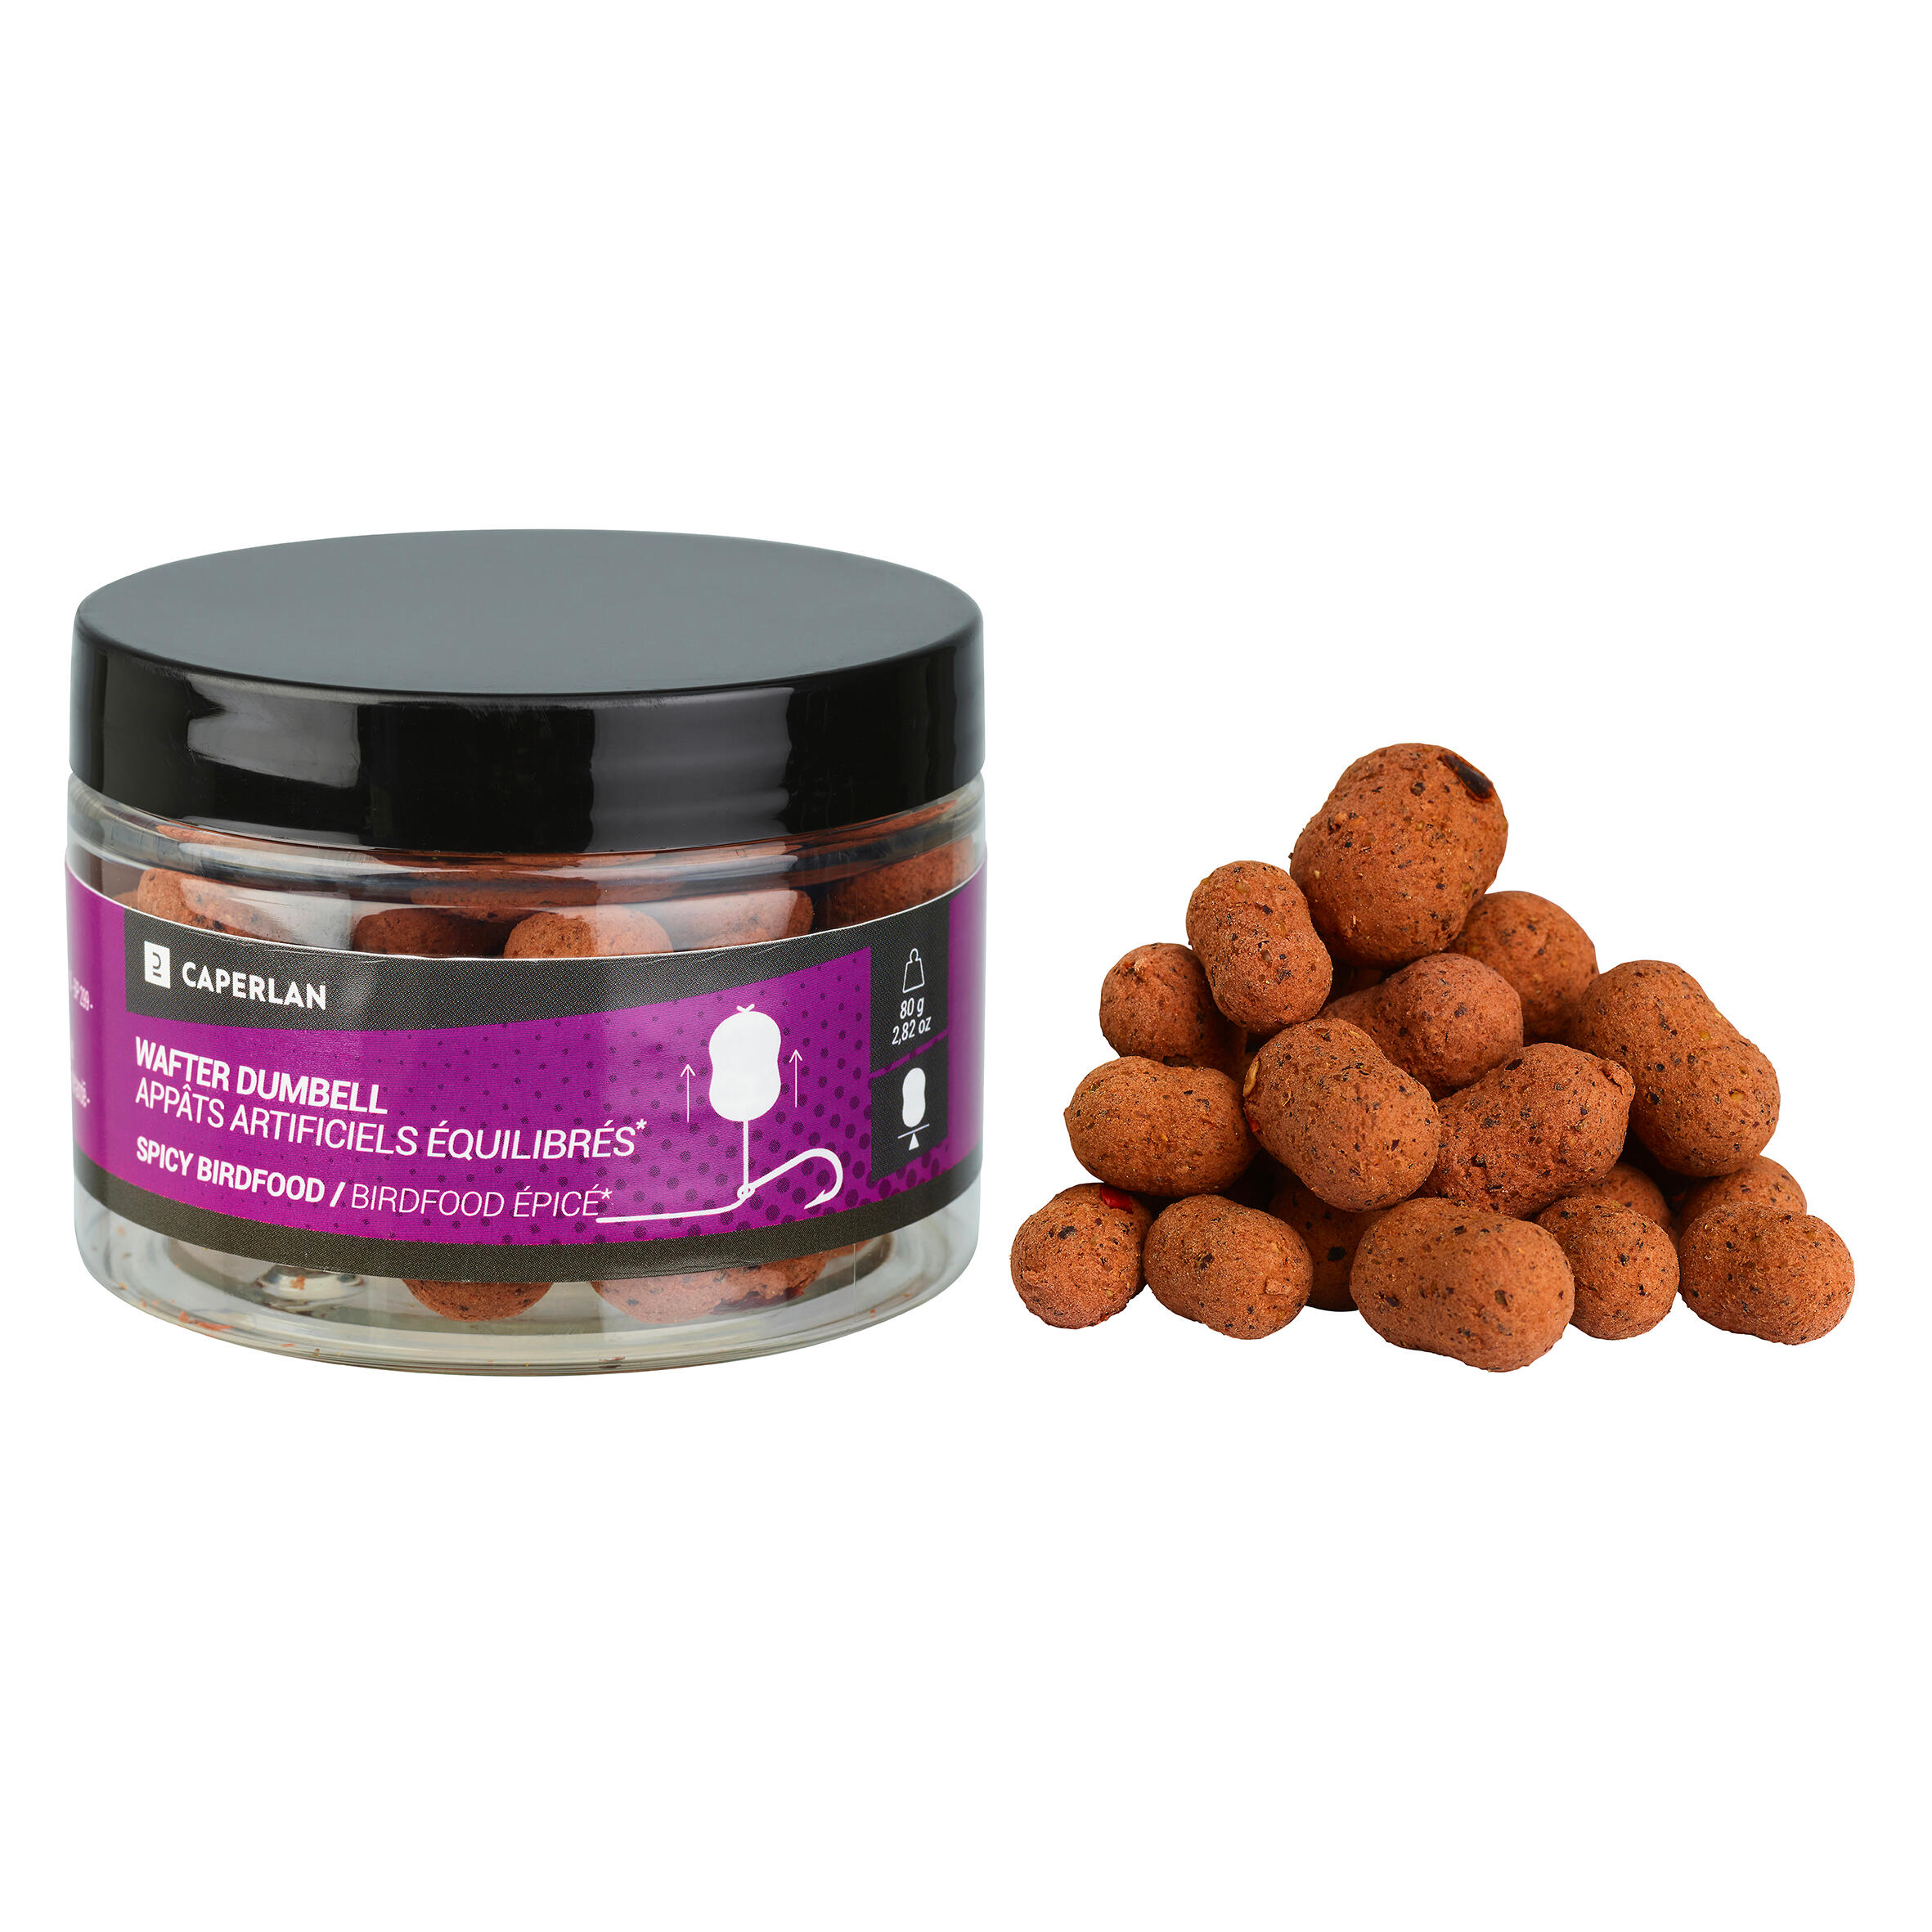 CAPERLAN Dumbell wafter Spicy Birdfood for carp fishing